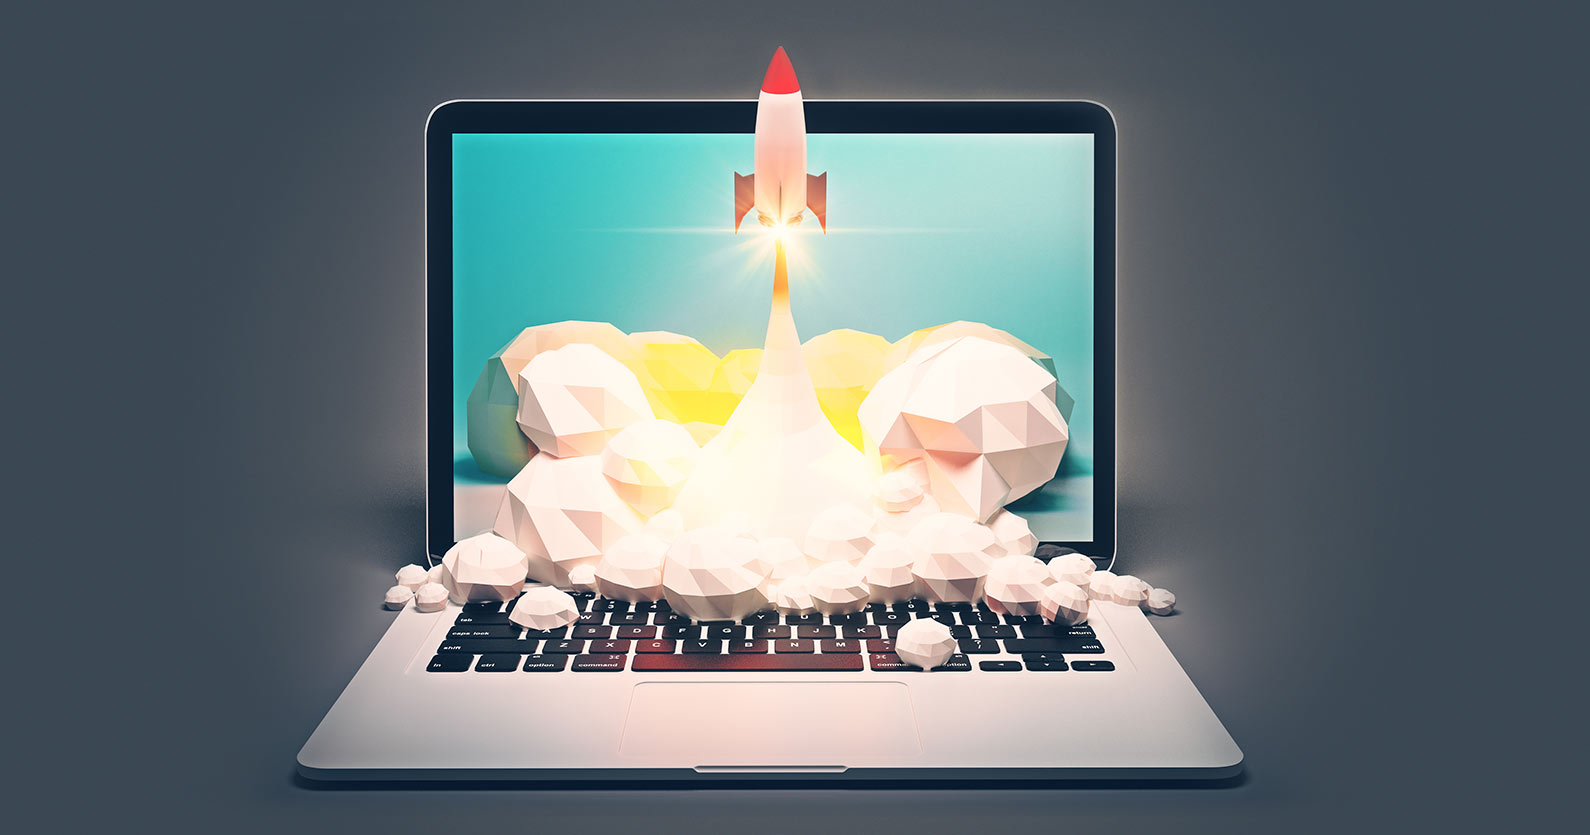 Illustration showing a laptop with a rocket taking off on screen